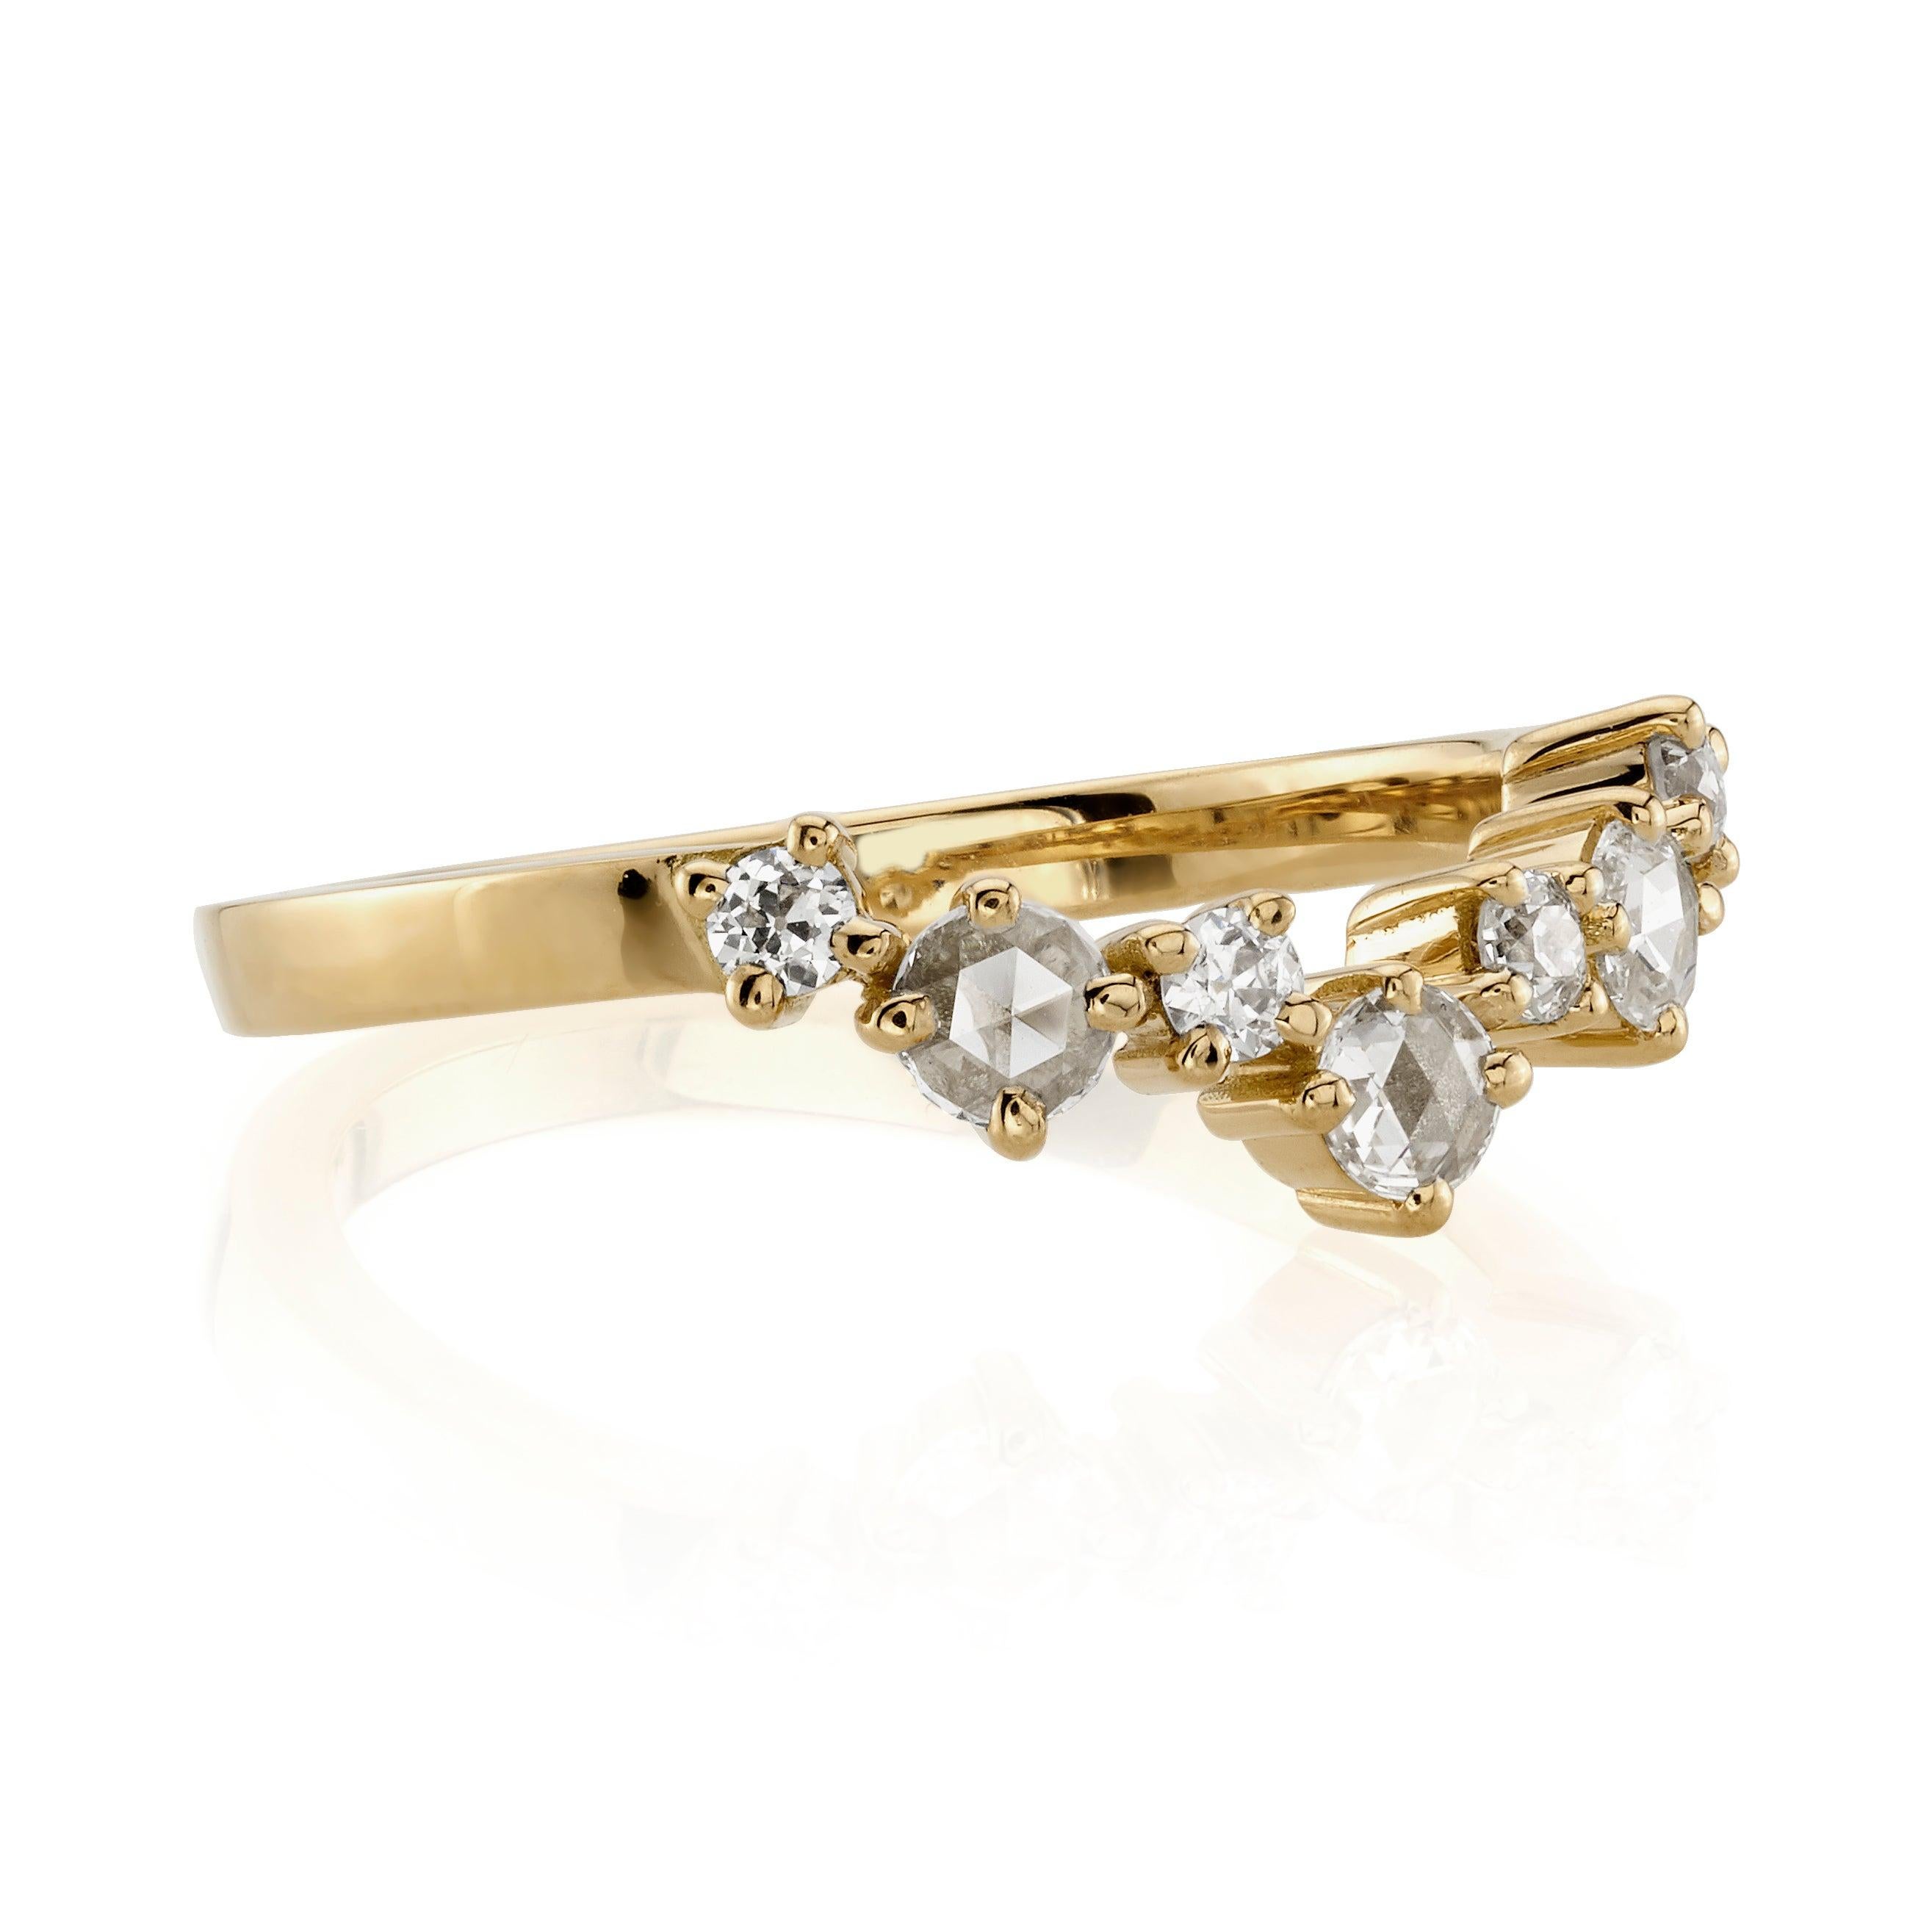 For Sale:  Handcrafted Brooke Mixed Cut Diamond Band by Single Stone 2